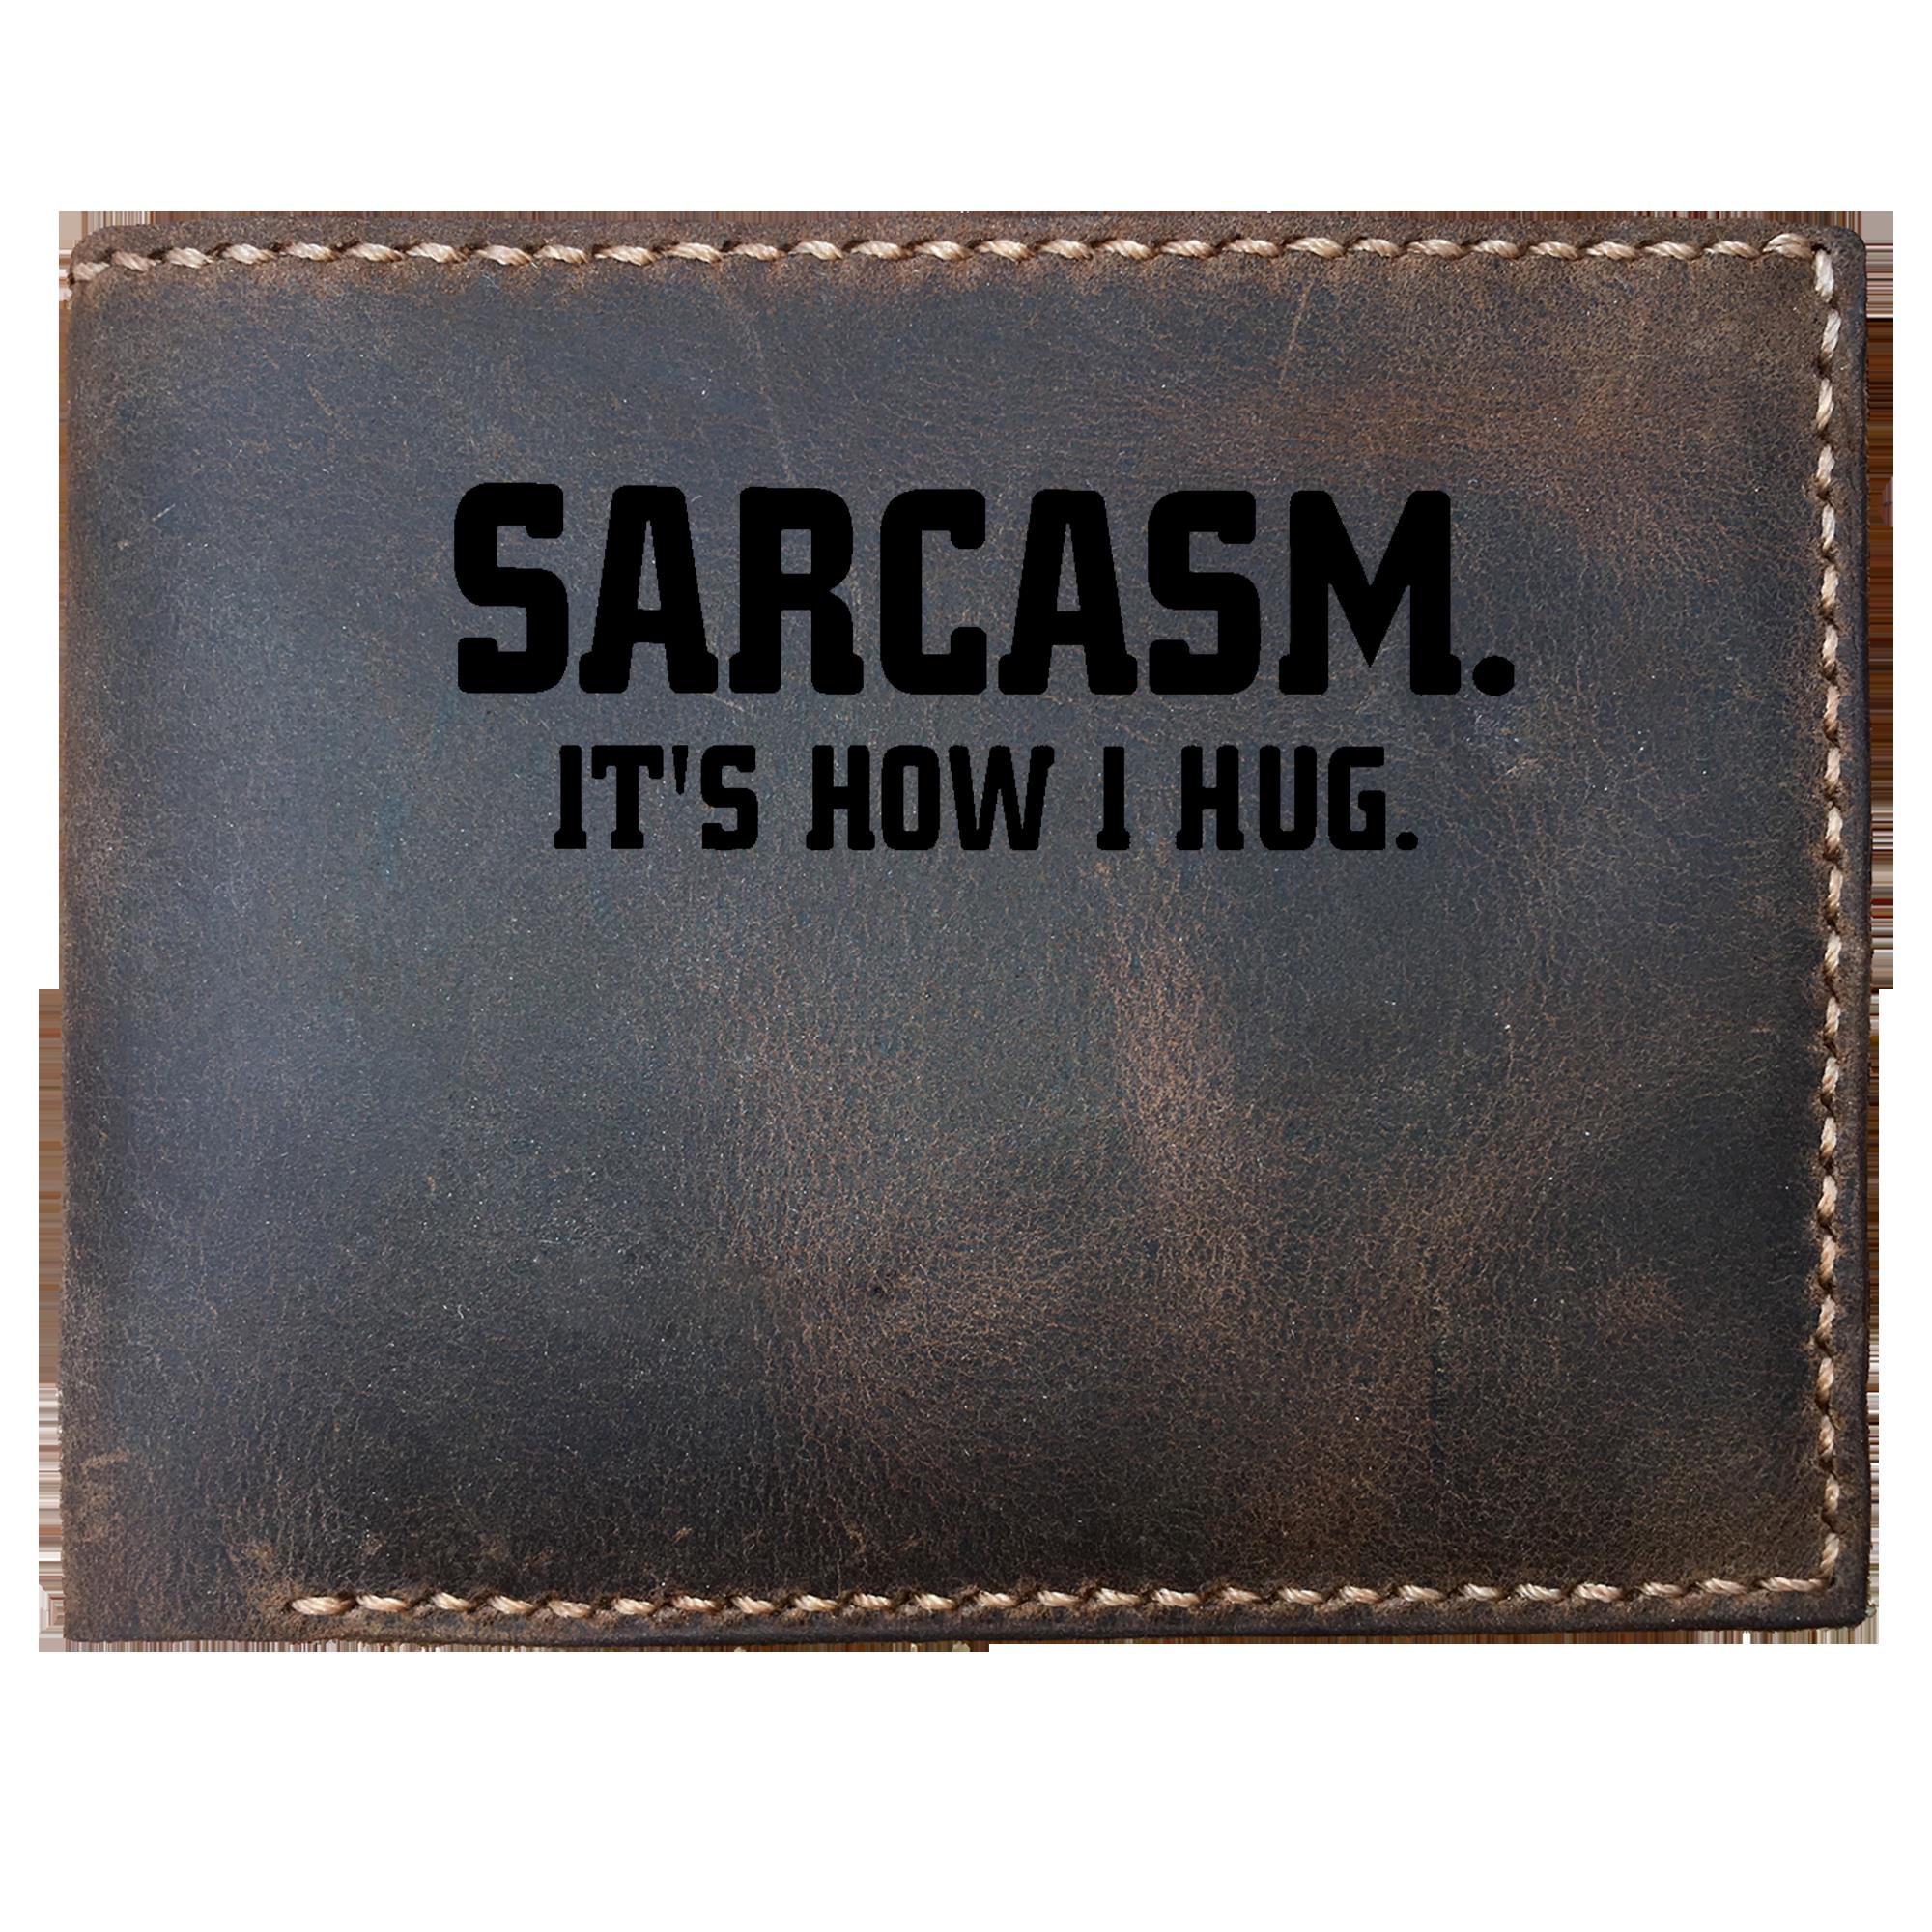 Skitongifts Funny Custom Laser Engraved Bifold Leather Wallet For Men, Sarcasm Its How I Hug Funny Perfect Joke Quotes S